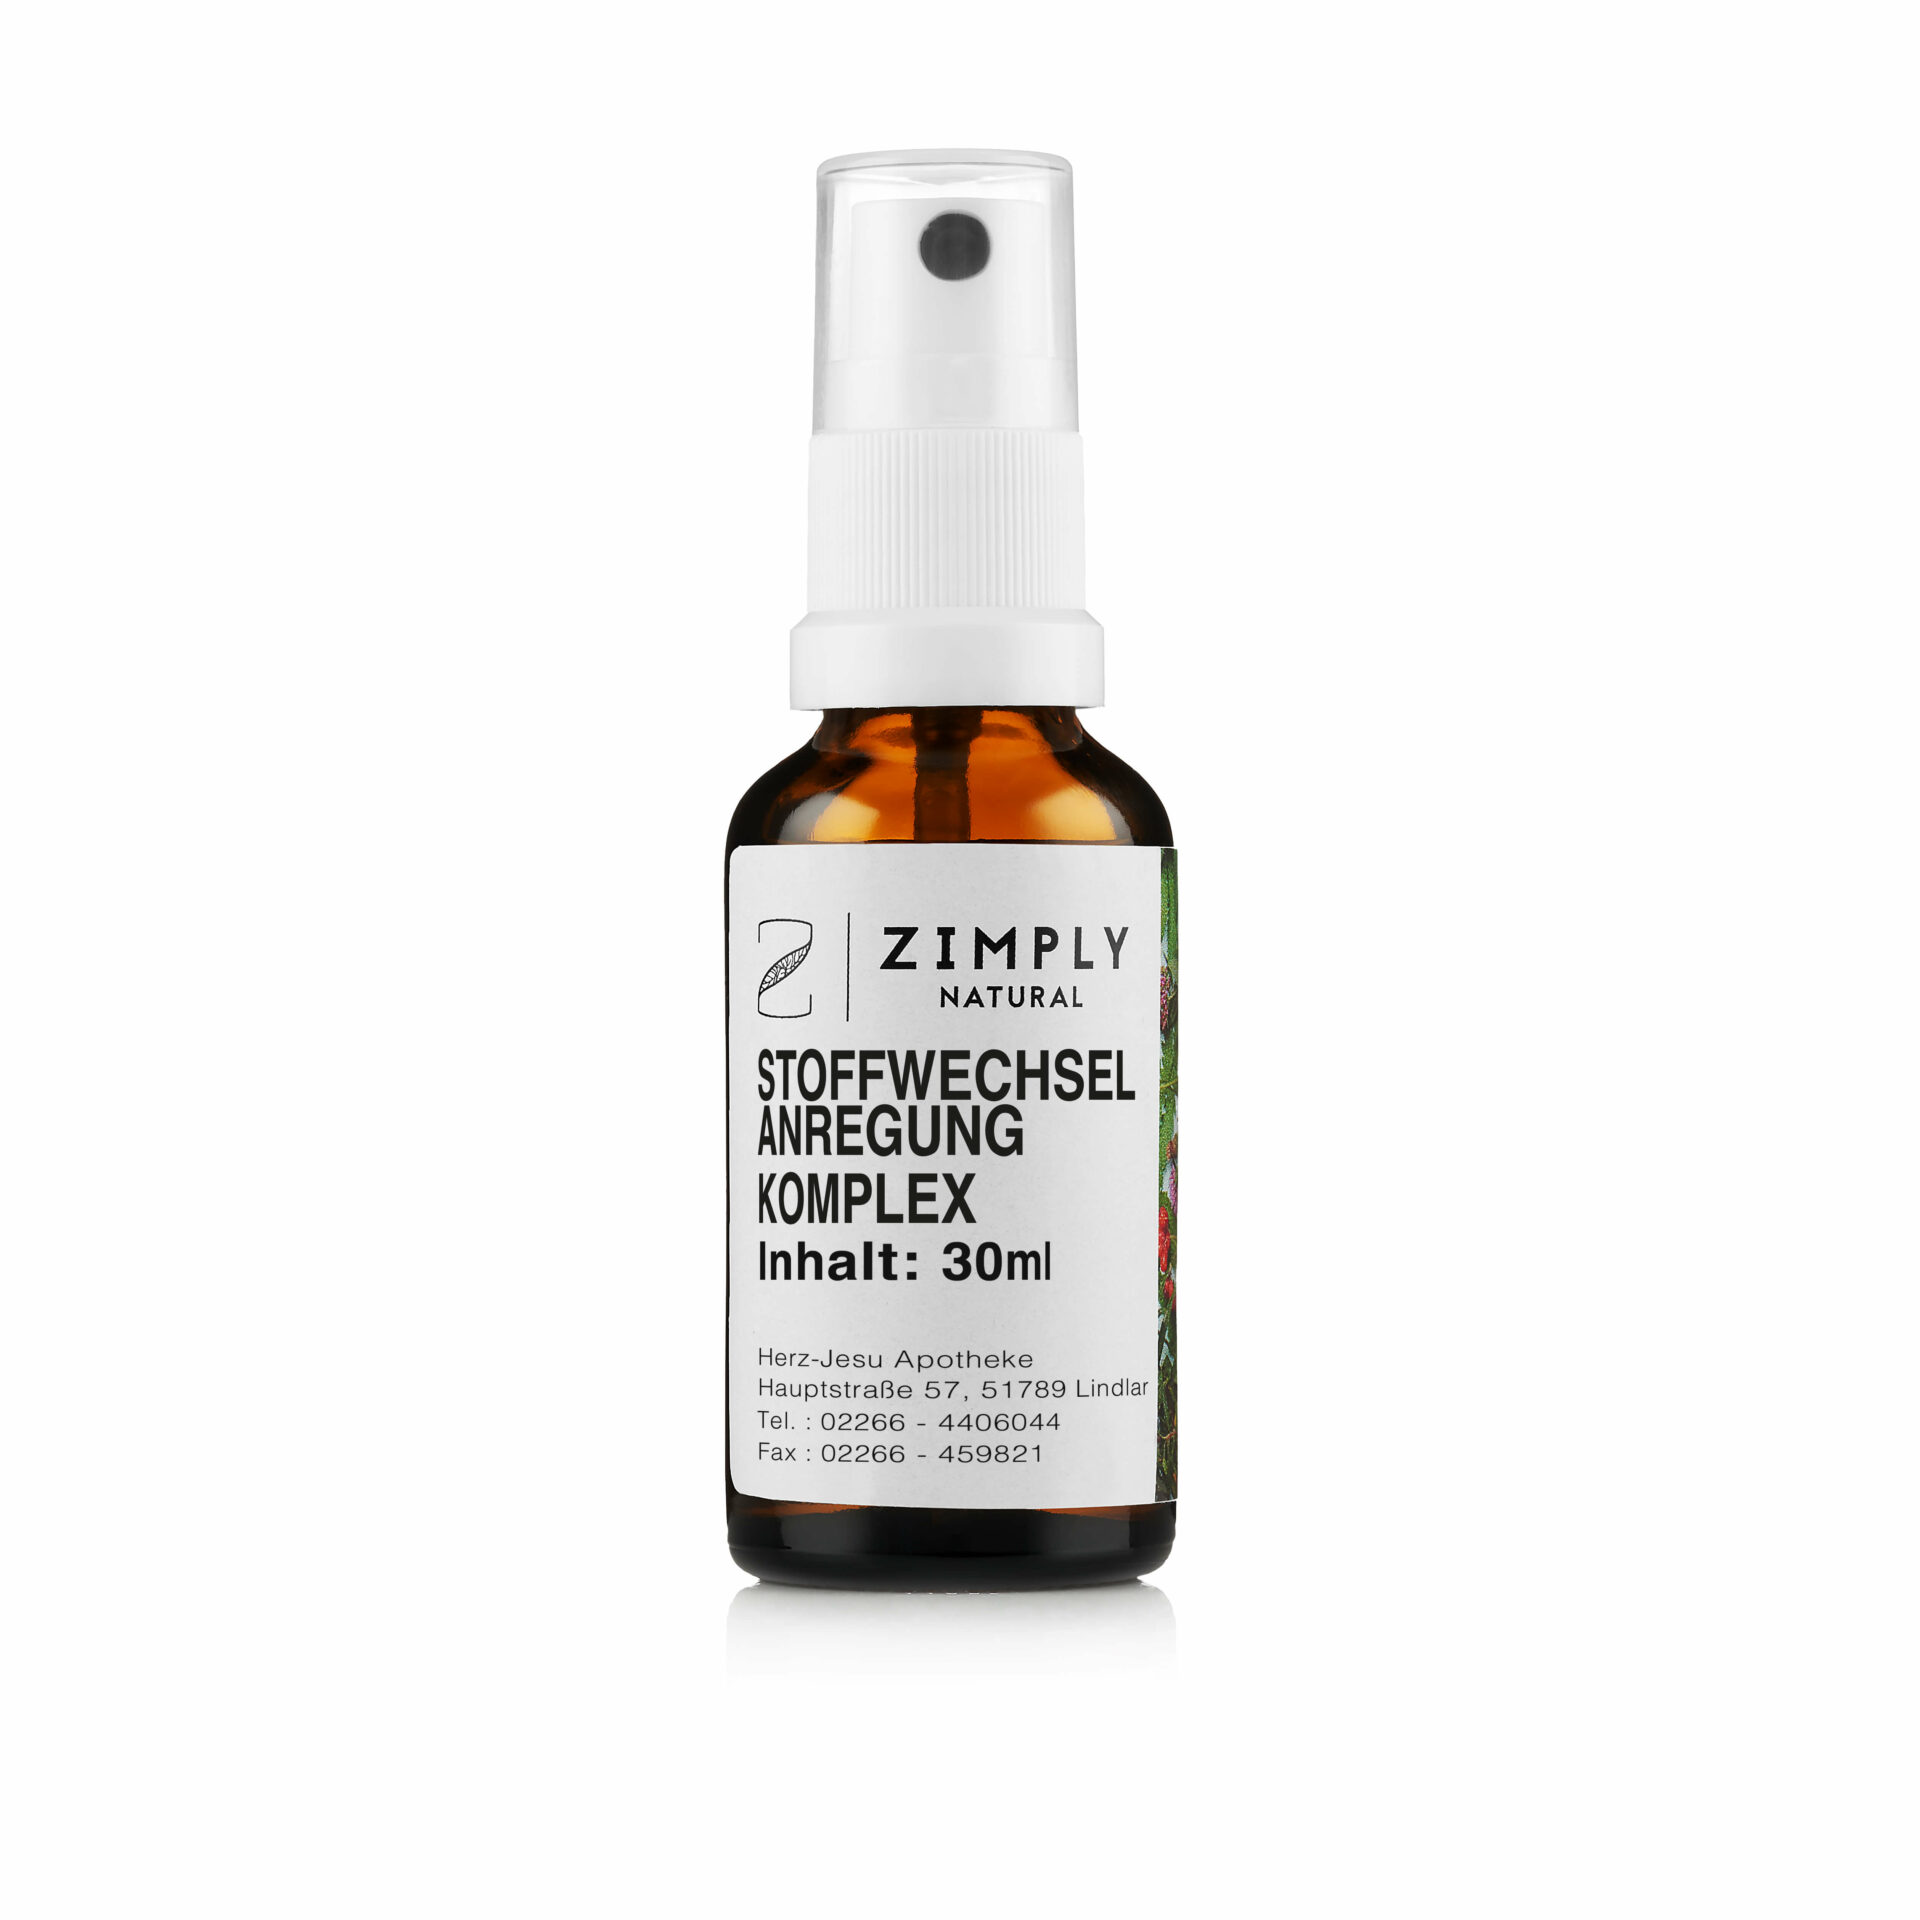 The Zimply Natural metabolism stimulation complex mixture to spray in the mouth.